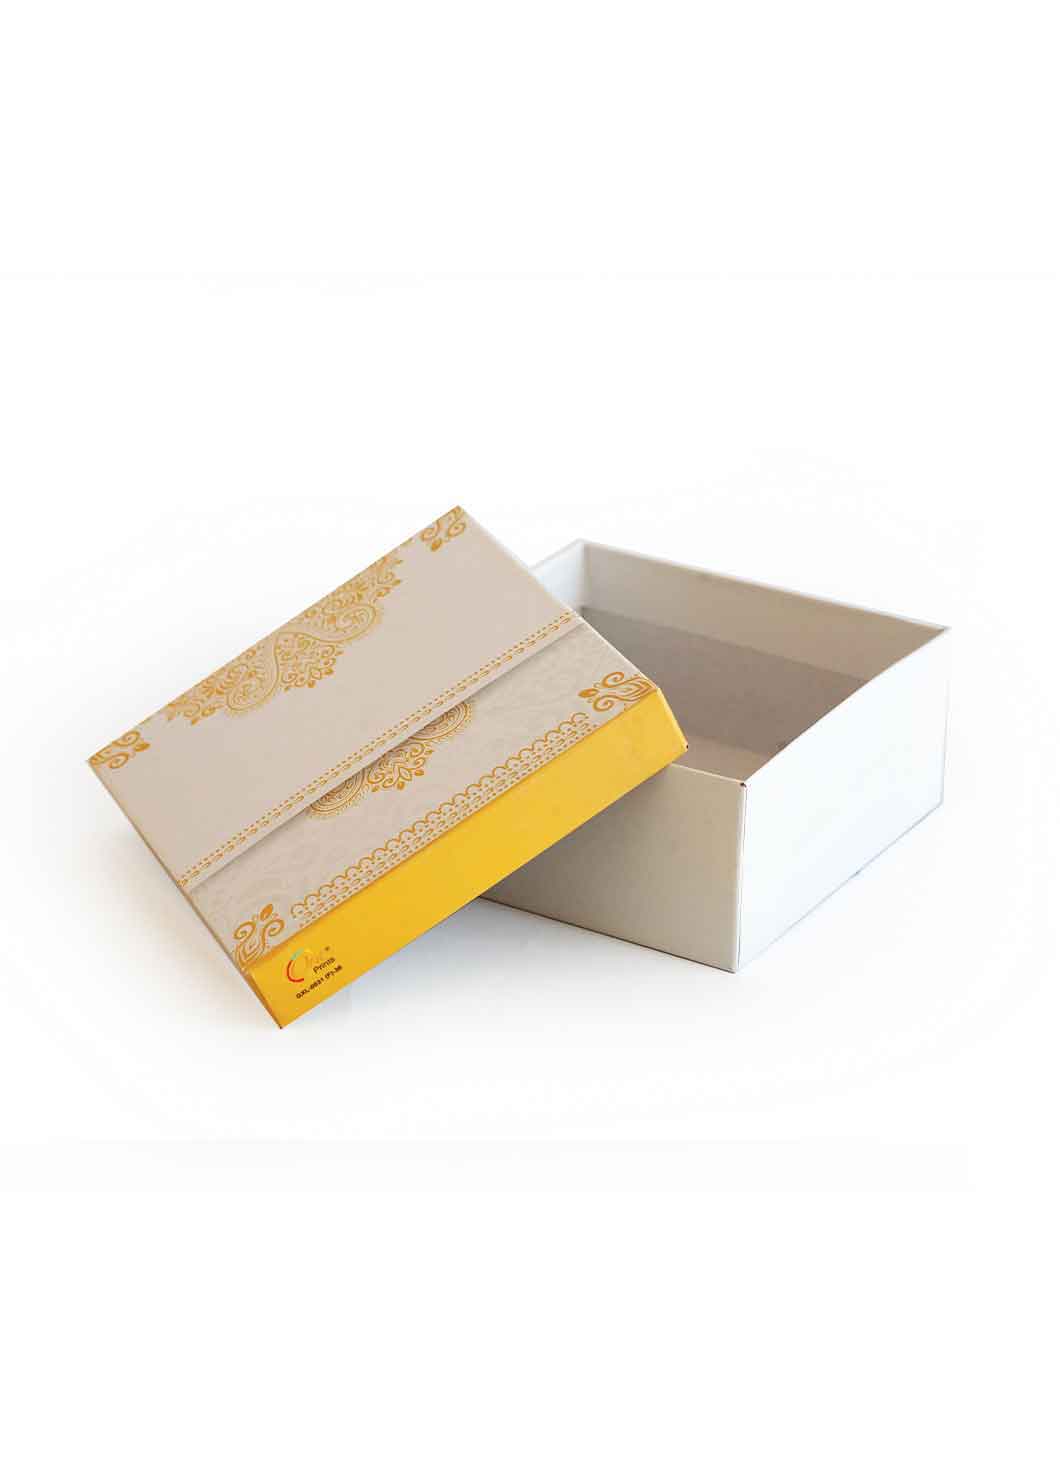 White and Golden Color Pattern Box for Packing Gifts